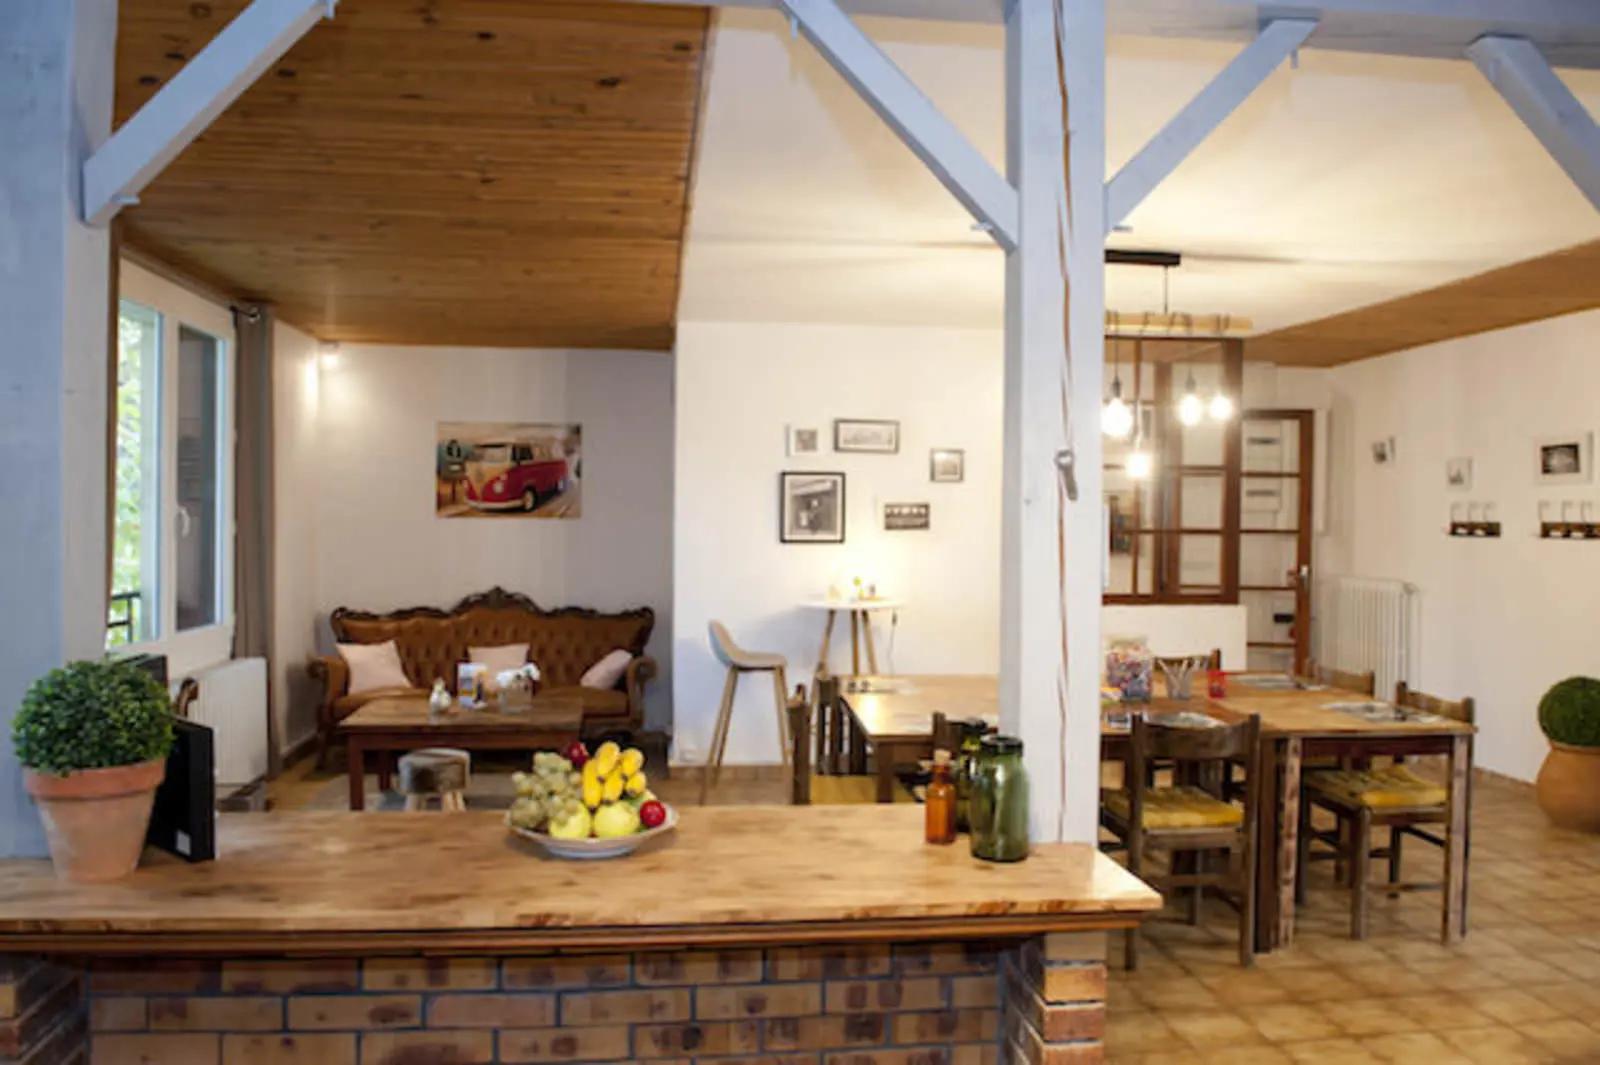 L'Appart, the village coworking center